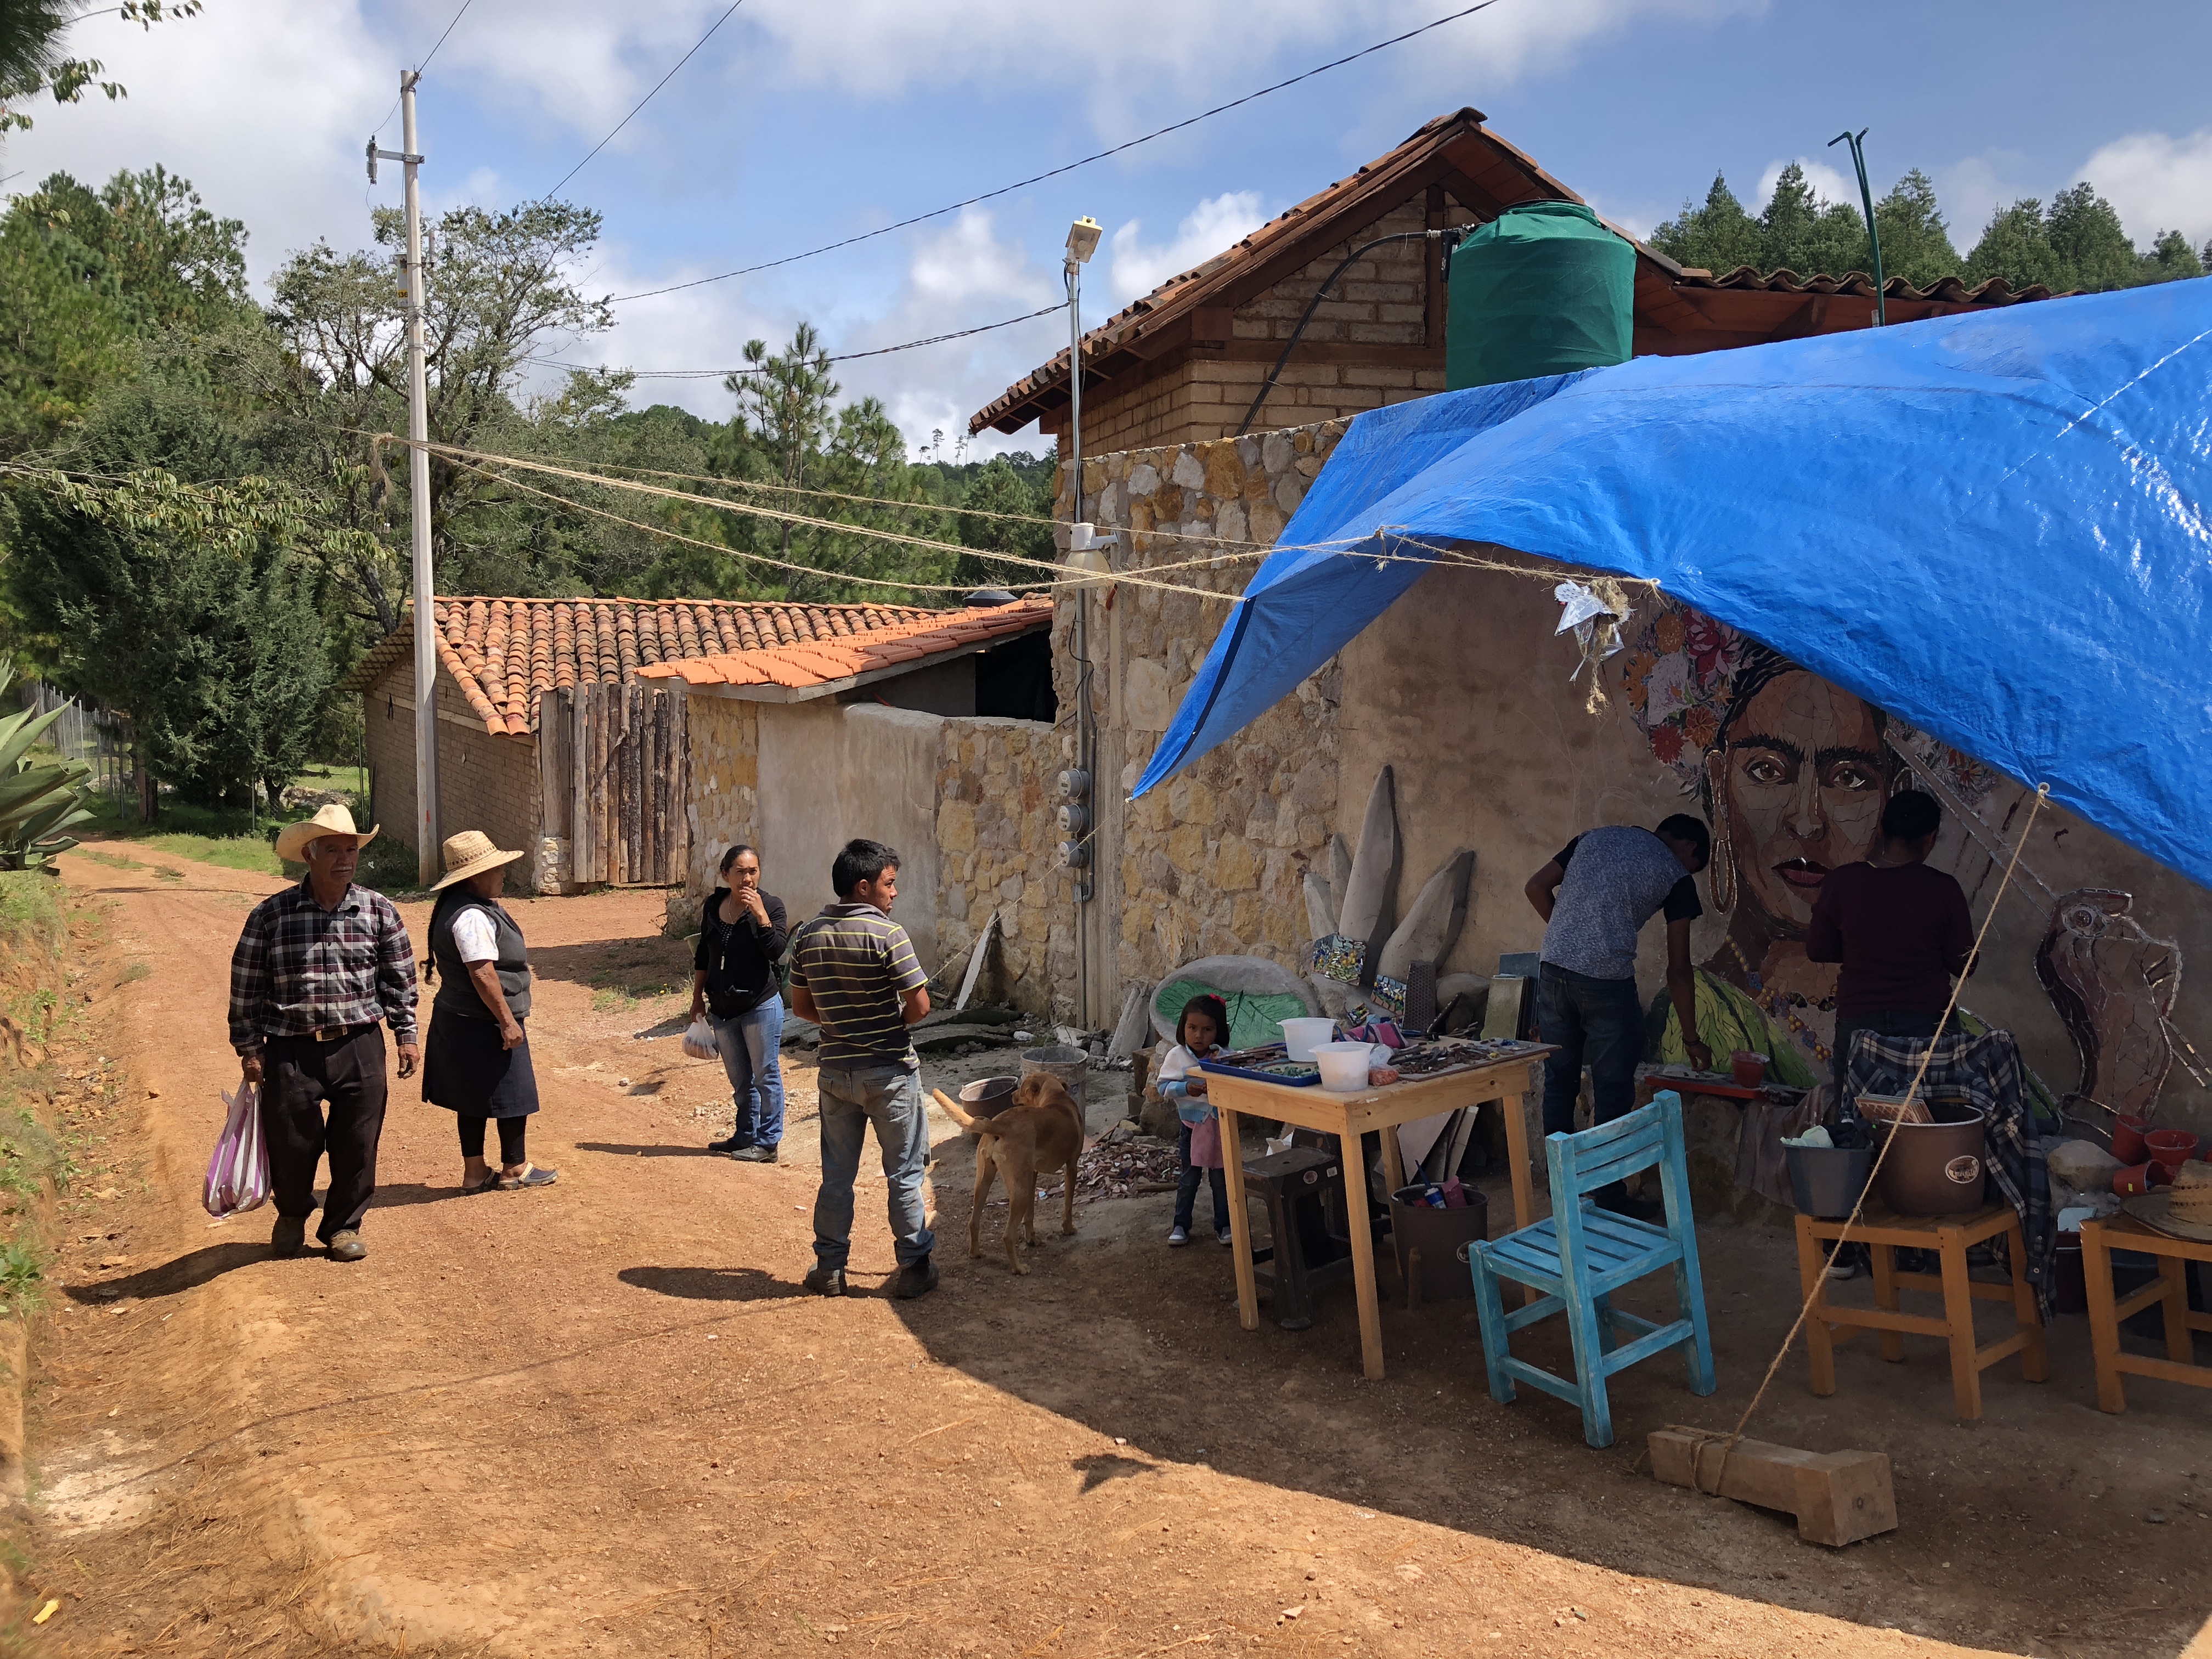 The worksite was located in a rural farming community. Neighbors and passers-by participated in various parts of the project and even made their own individual projects from tile that was not able to be used in the mural.